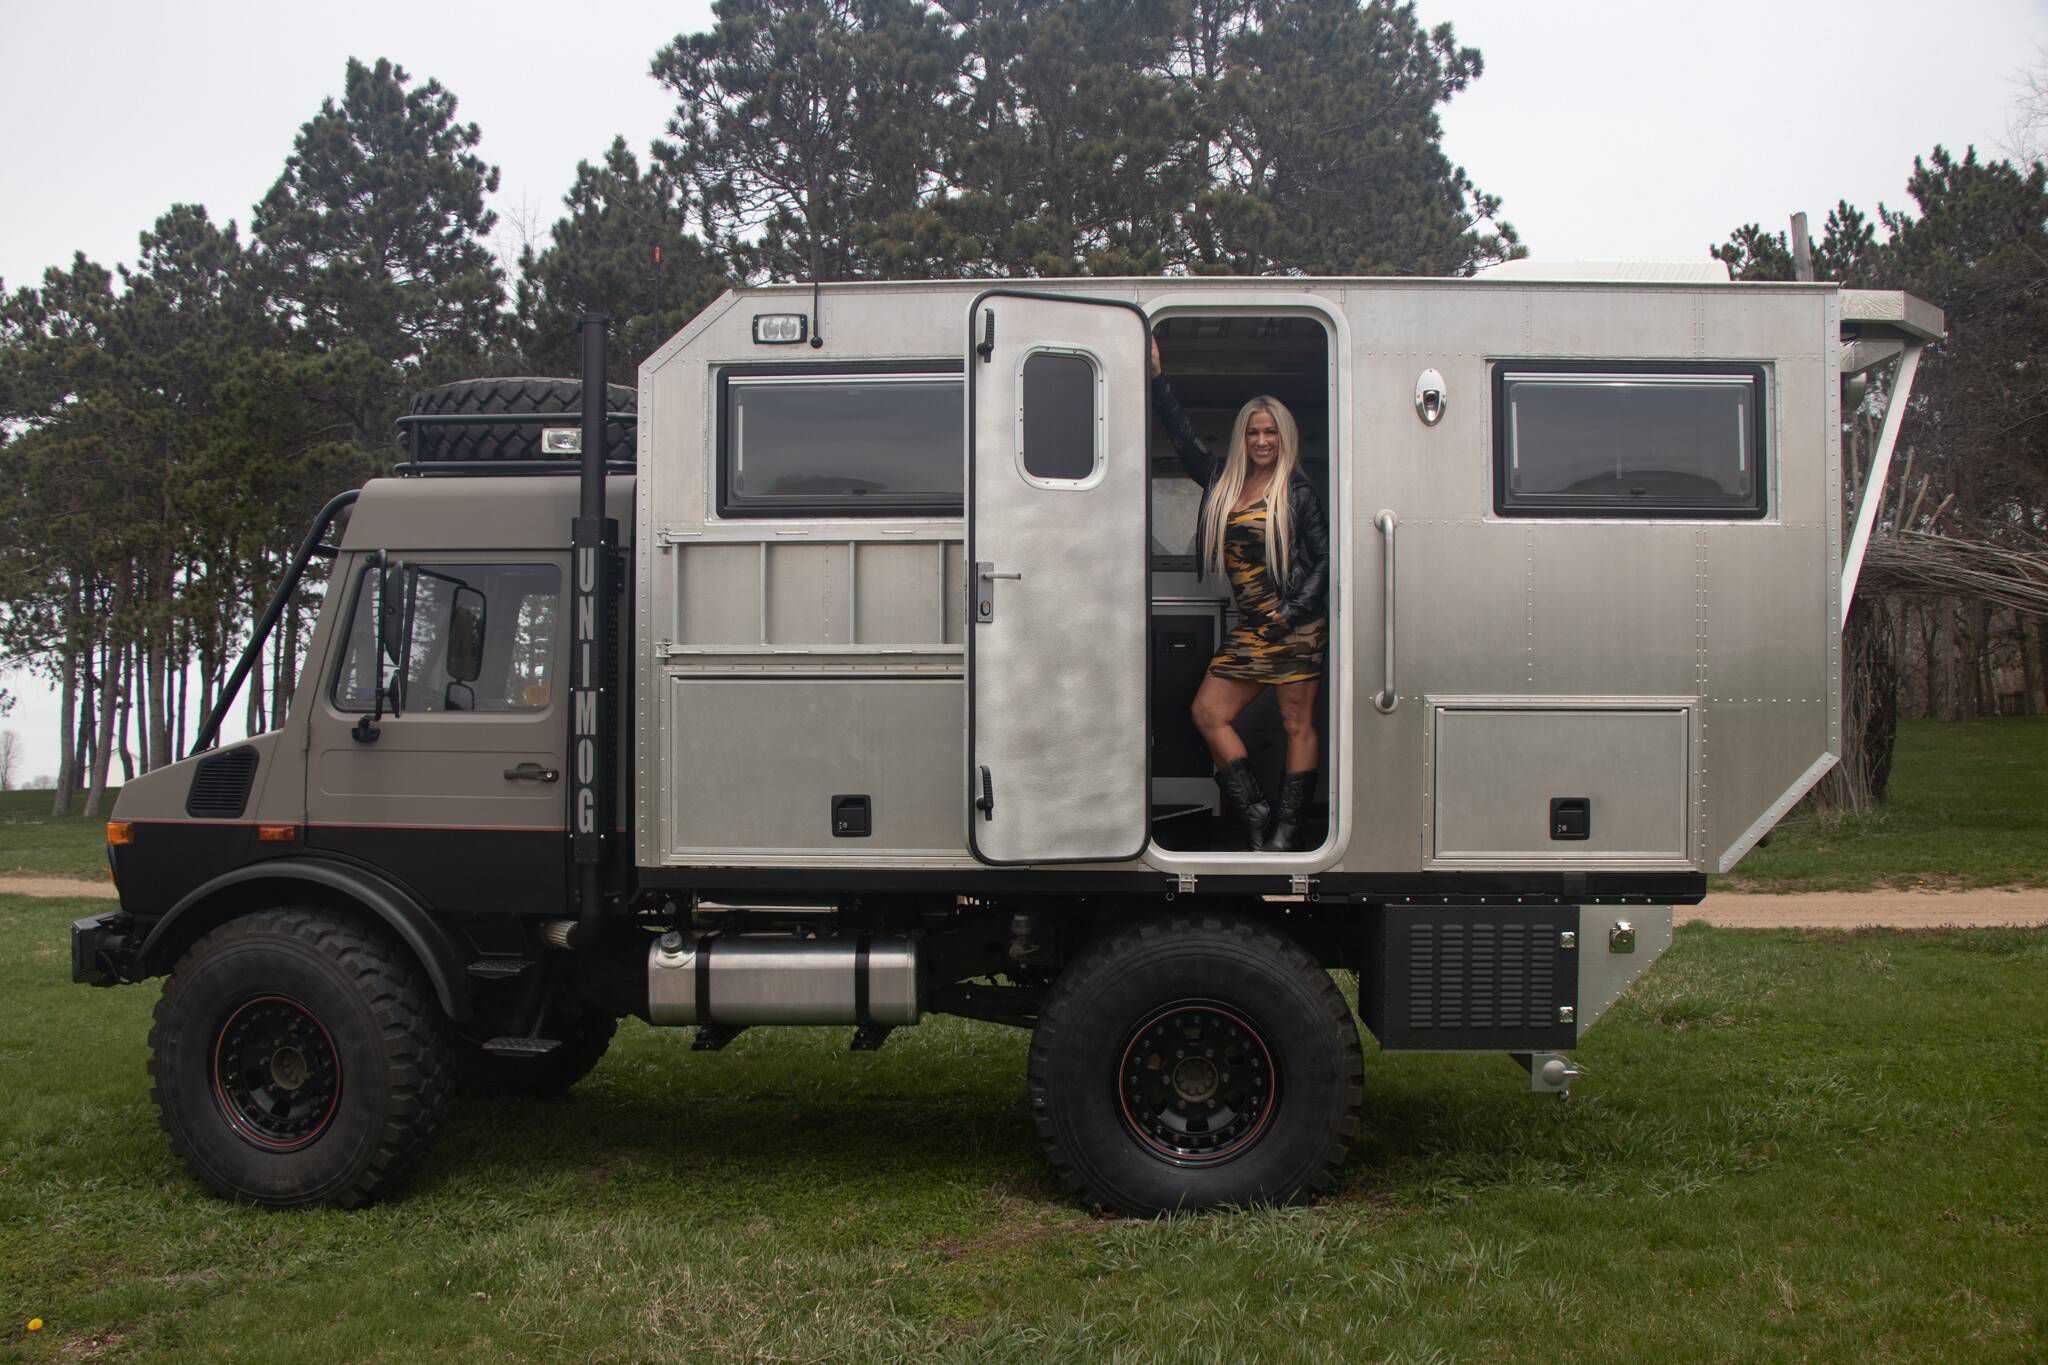 https://s1.cdn.autoevolution.com/images/news/1985-mercedes-benz-unimog-is-the-ultimate-off-road-camper-won-t-come-cheap-at-all-192665_1.jpg